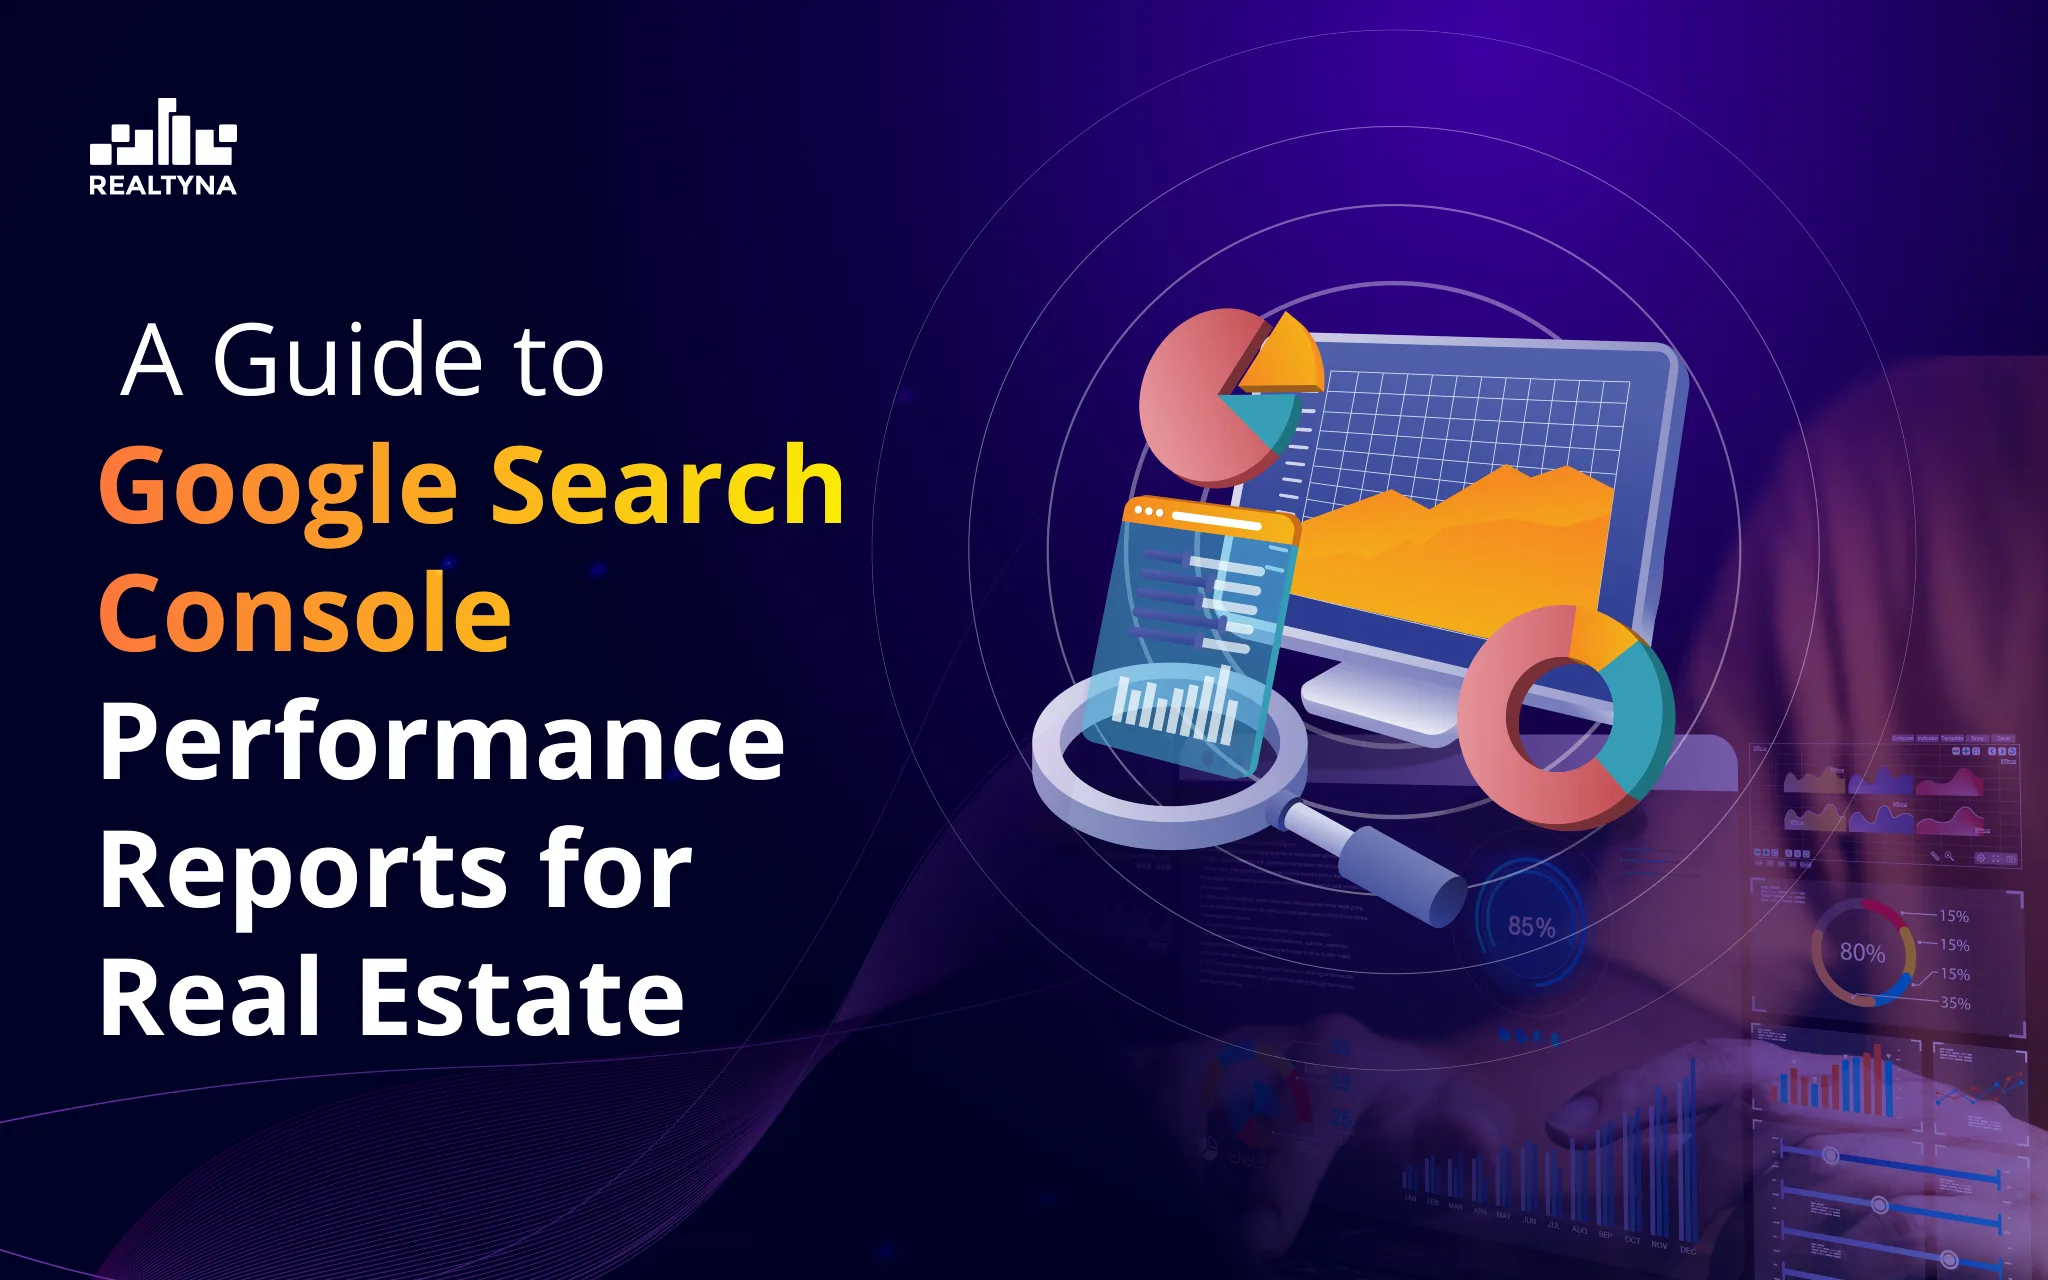 A Guide to Google Search Console Performance Reports for Real Estate